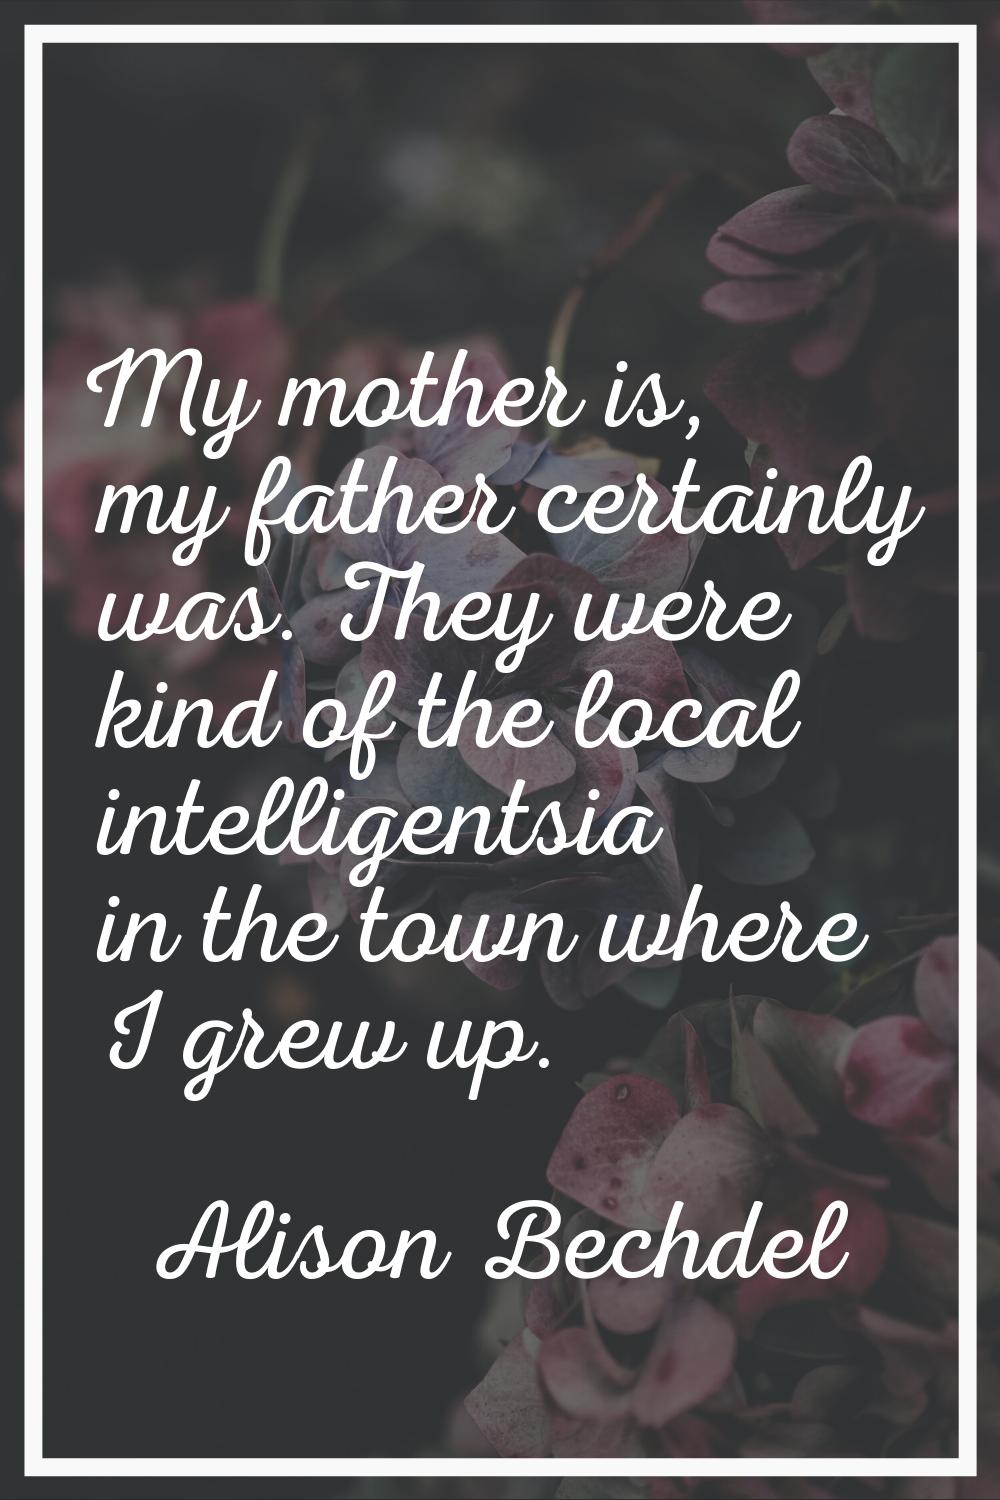 My mother is, my father certainly was. They were kind of the local intelligentsia in the town where